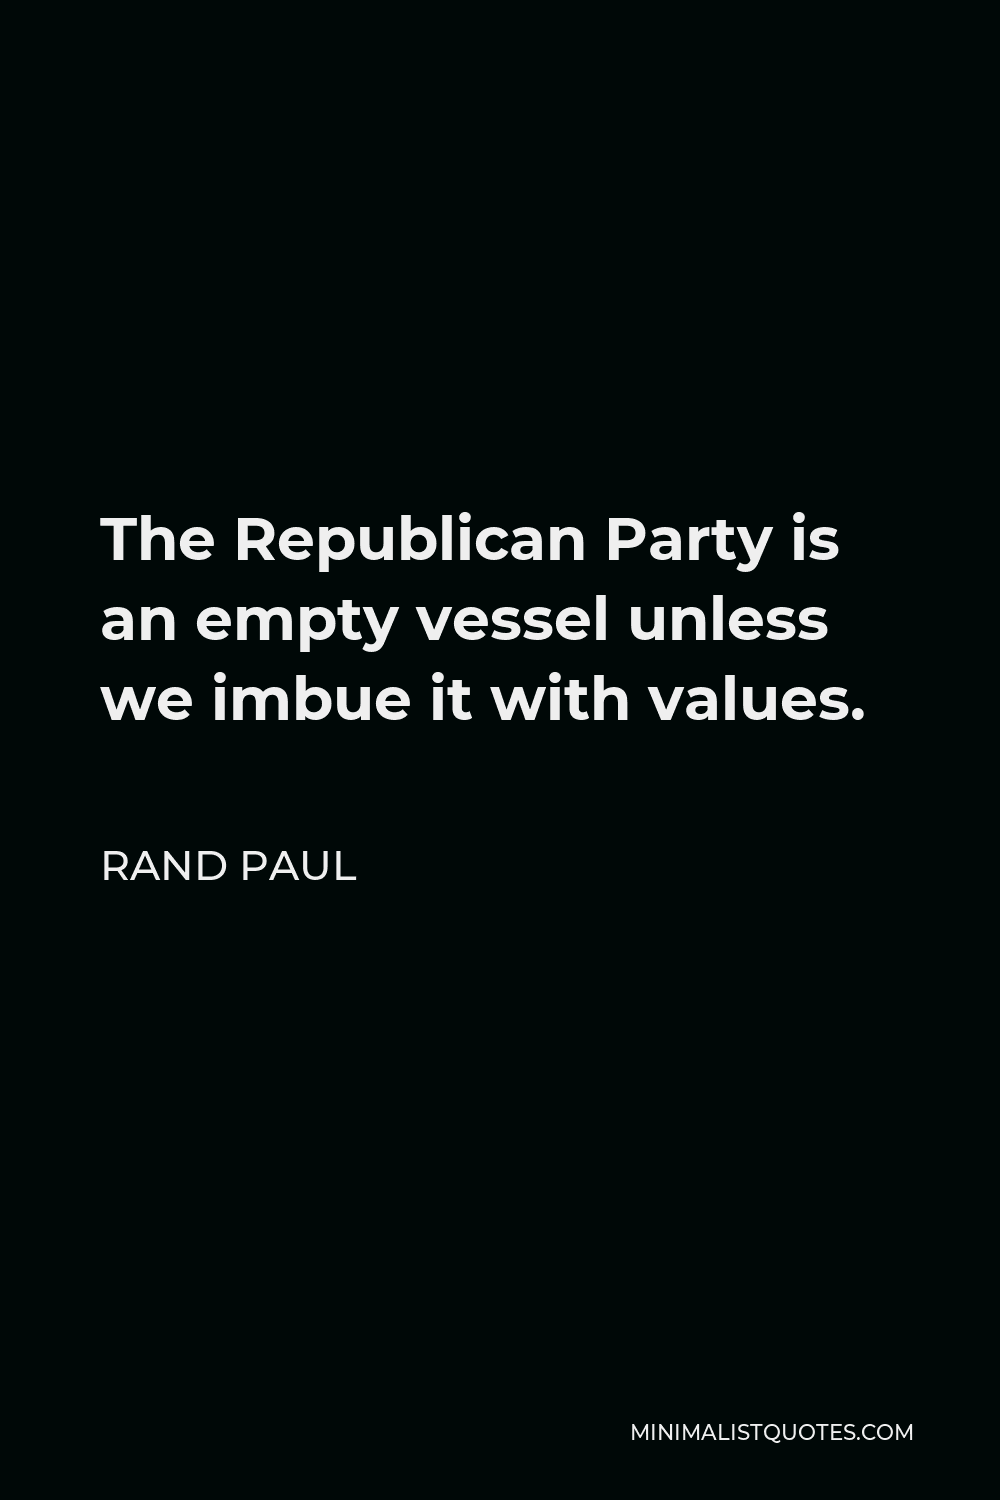 Rand Paul Quote - The Republican Party is an empty vessel unless we imbue it with values.